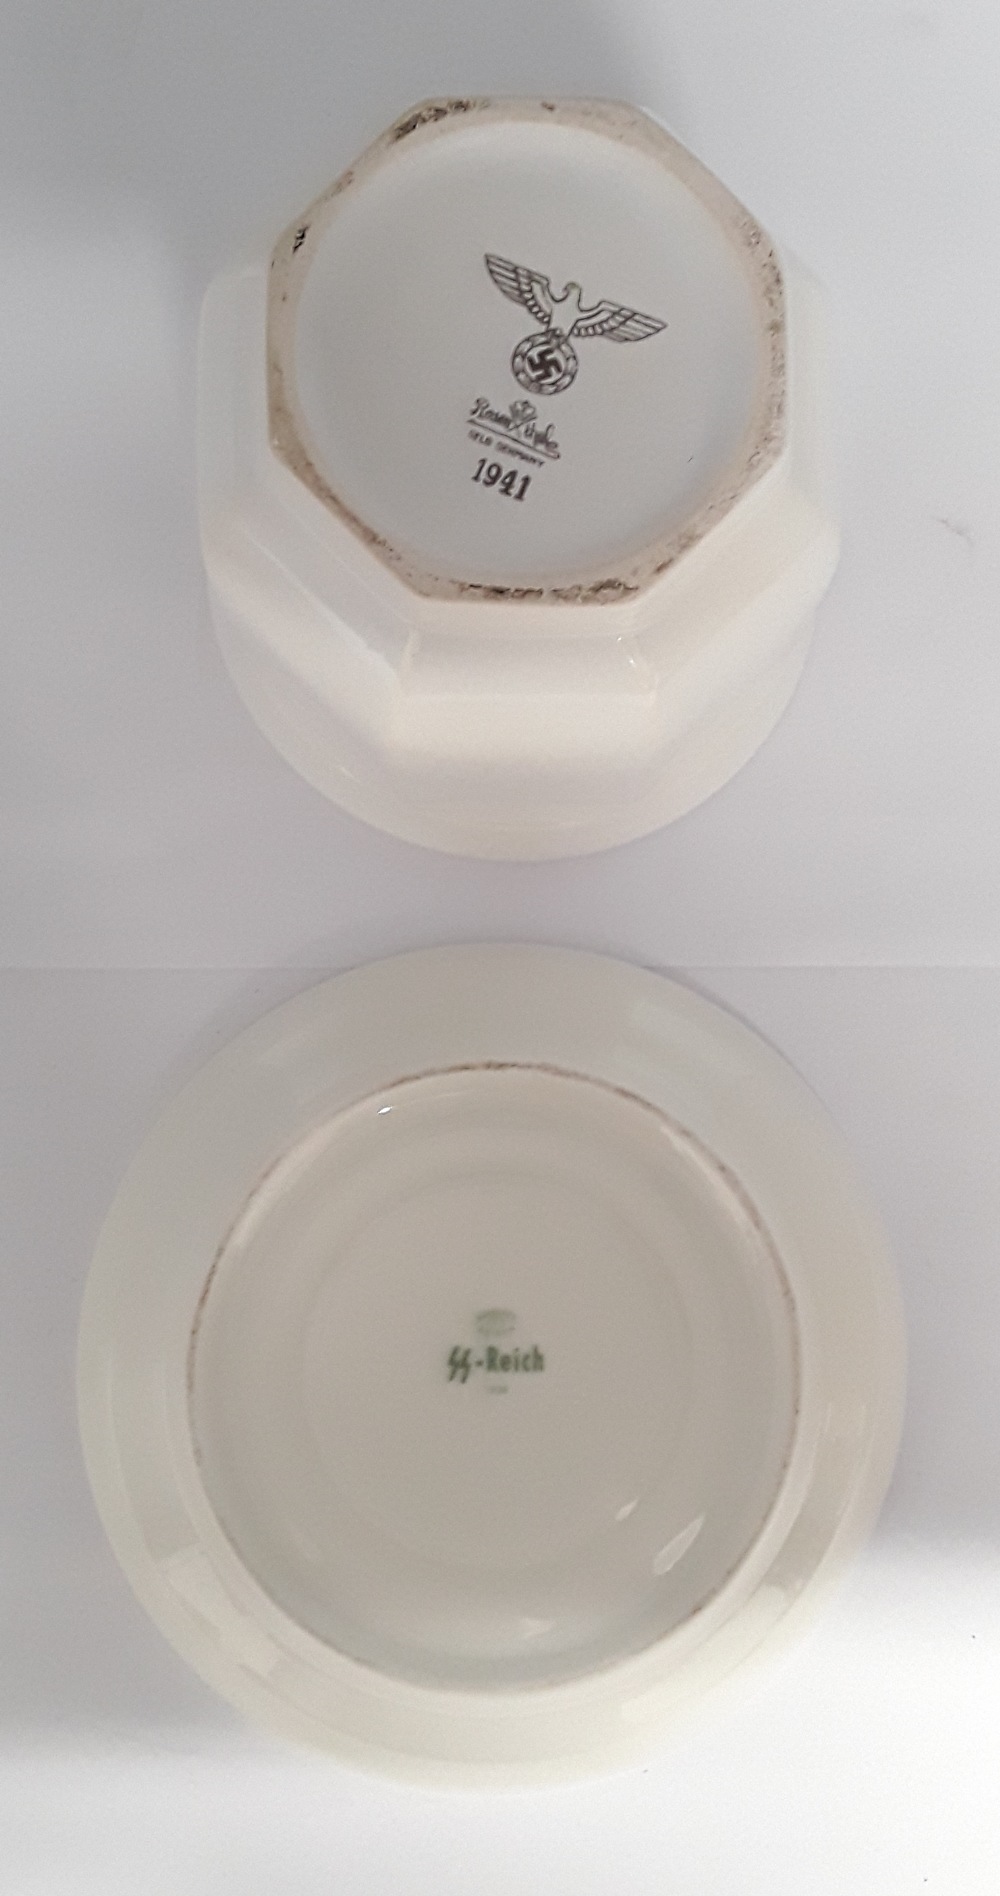 A 1938 dated Third Reich SS ceramic saucer and a 1941 dated ceramic bowl.